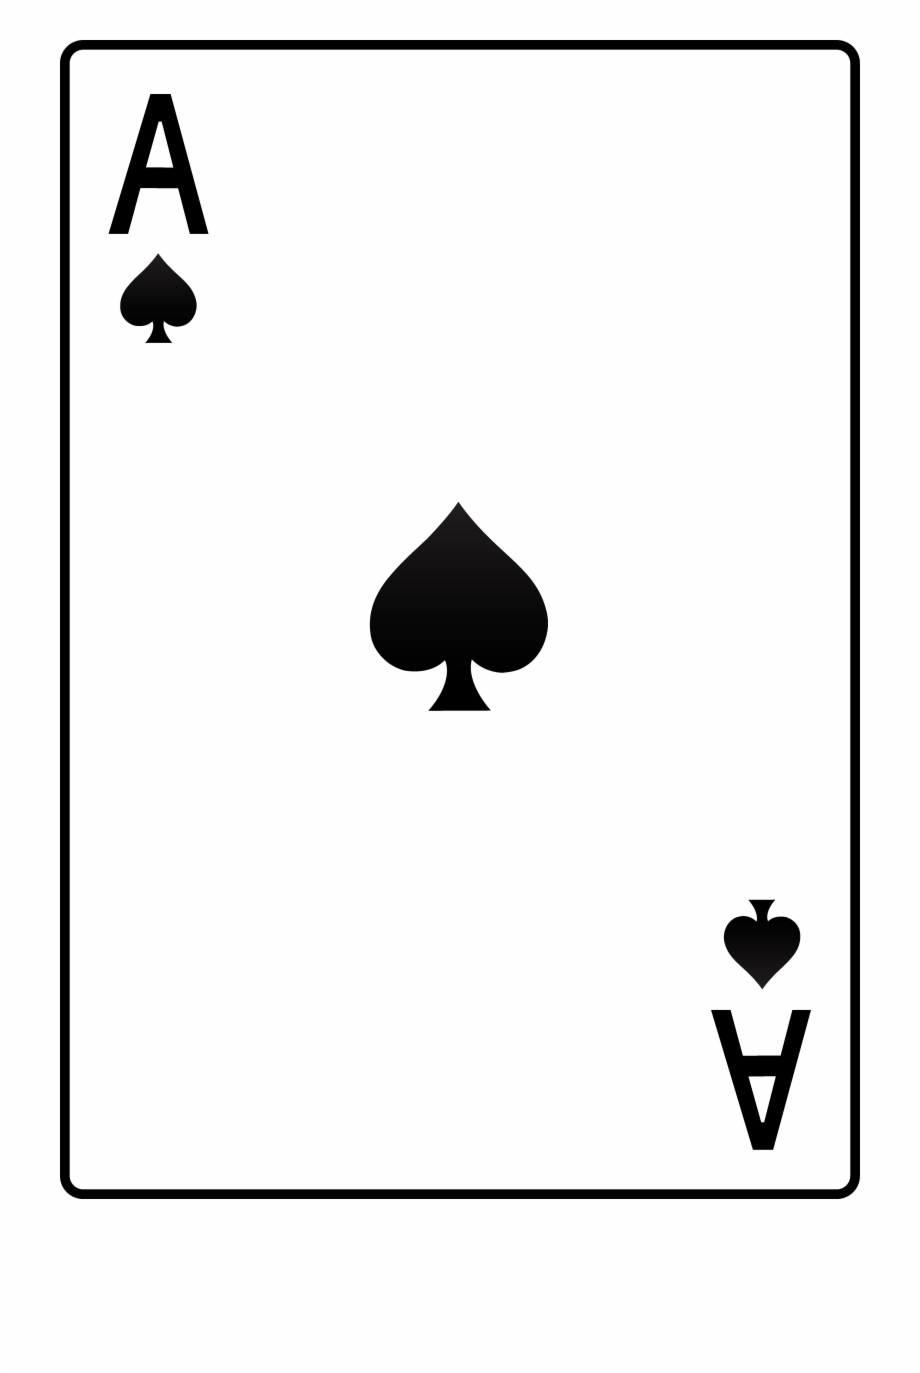 Ace Card Png File Ace Playing Card Png.